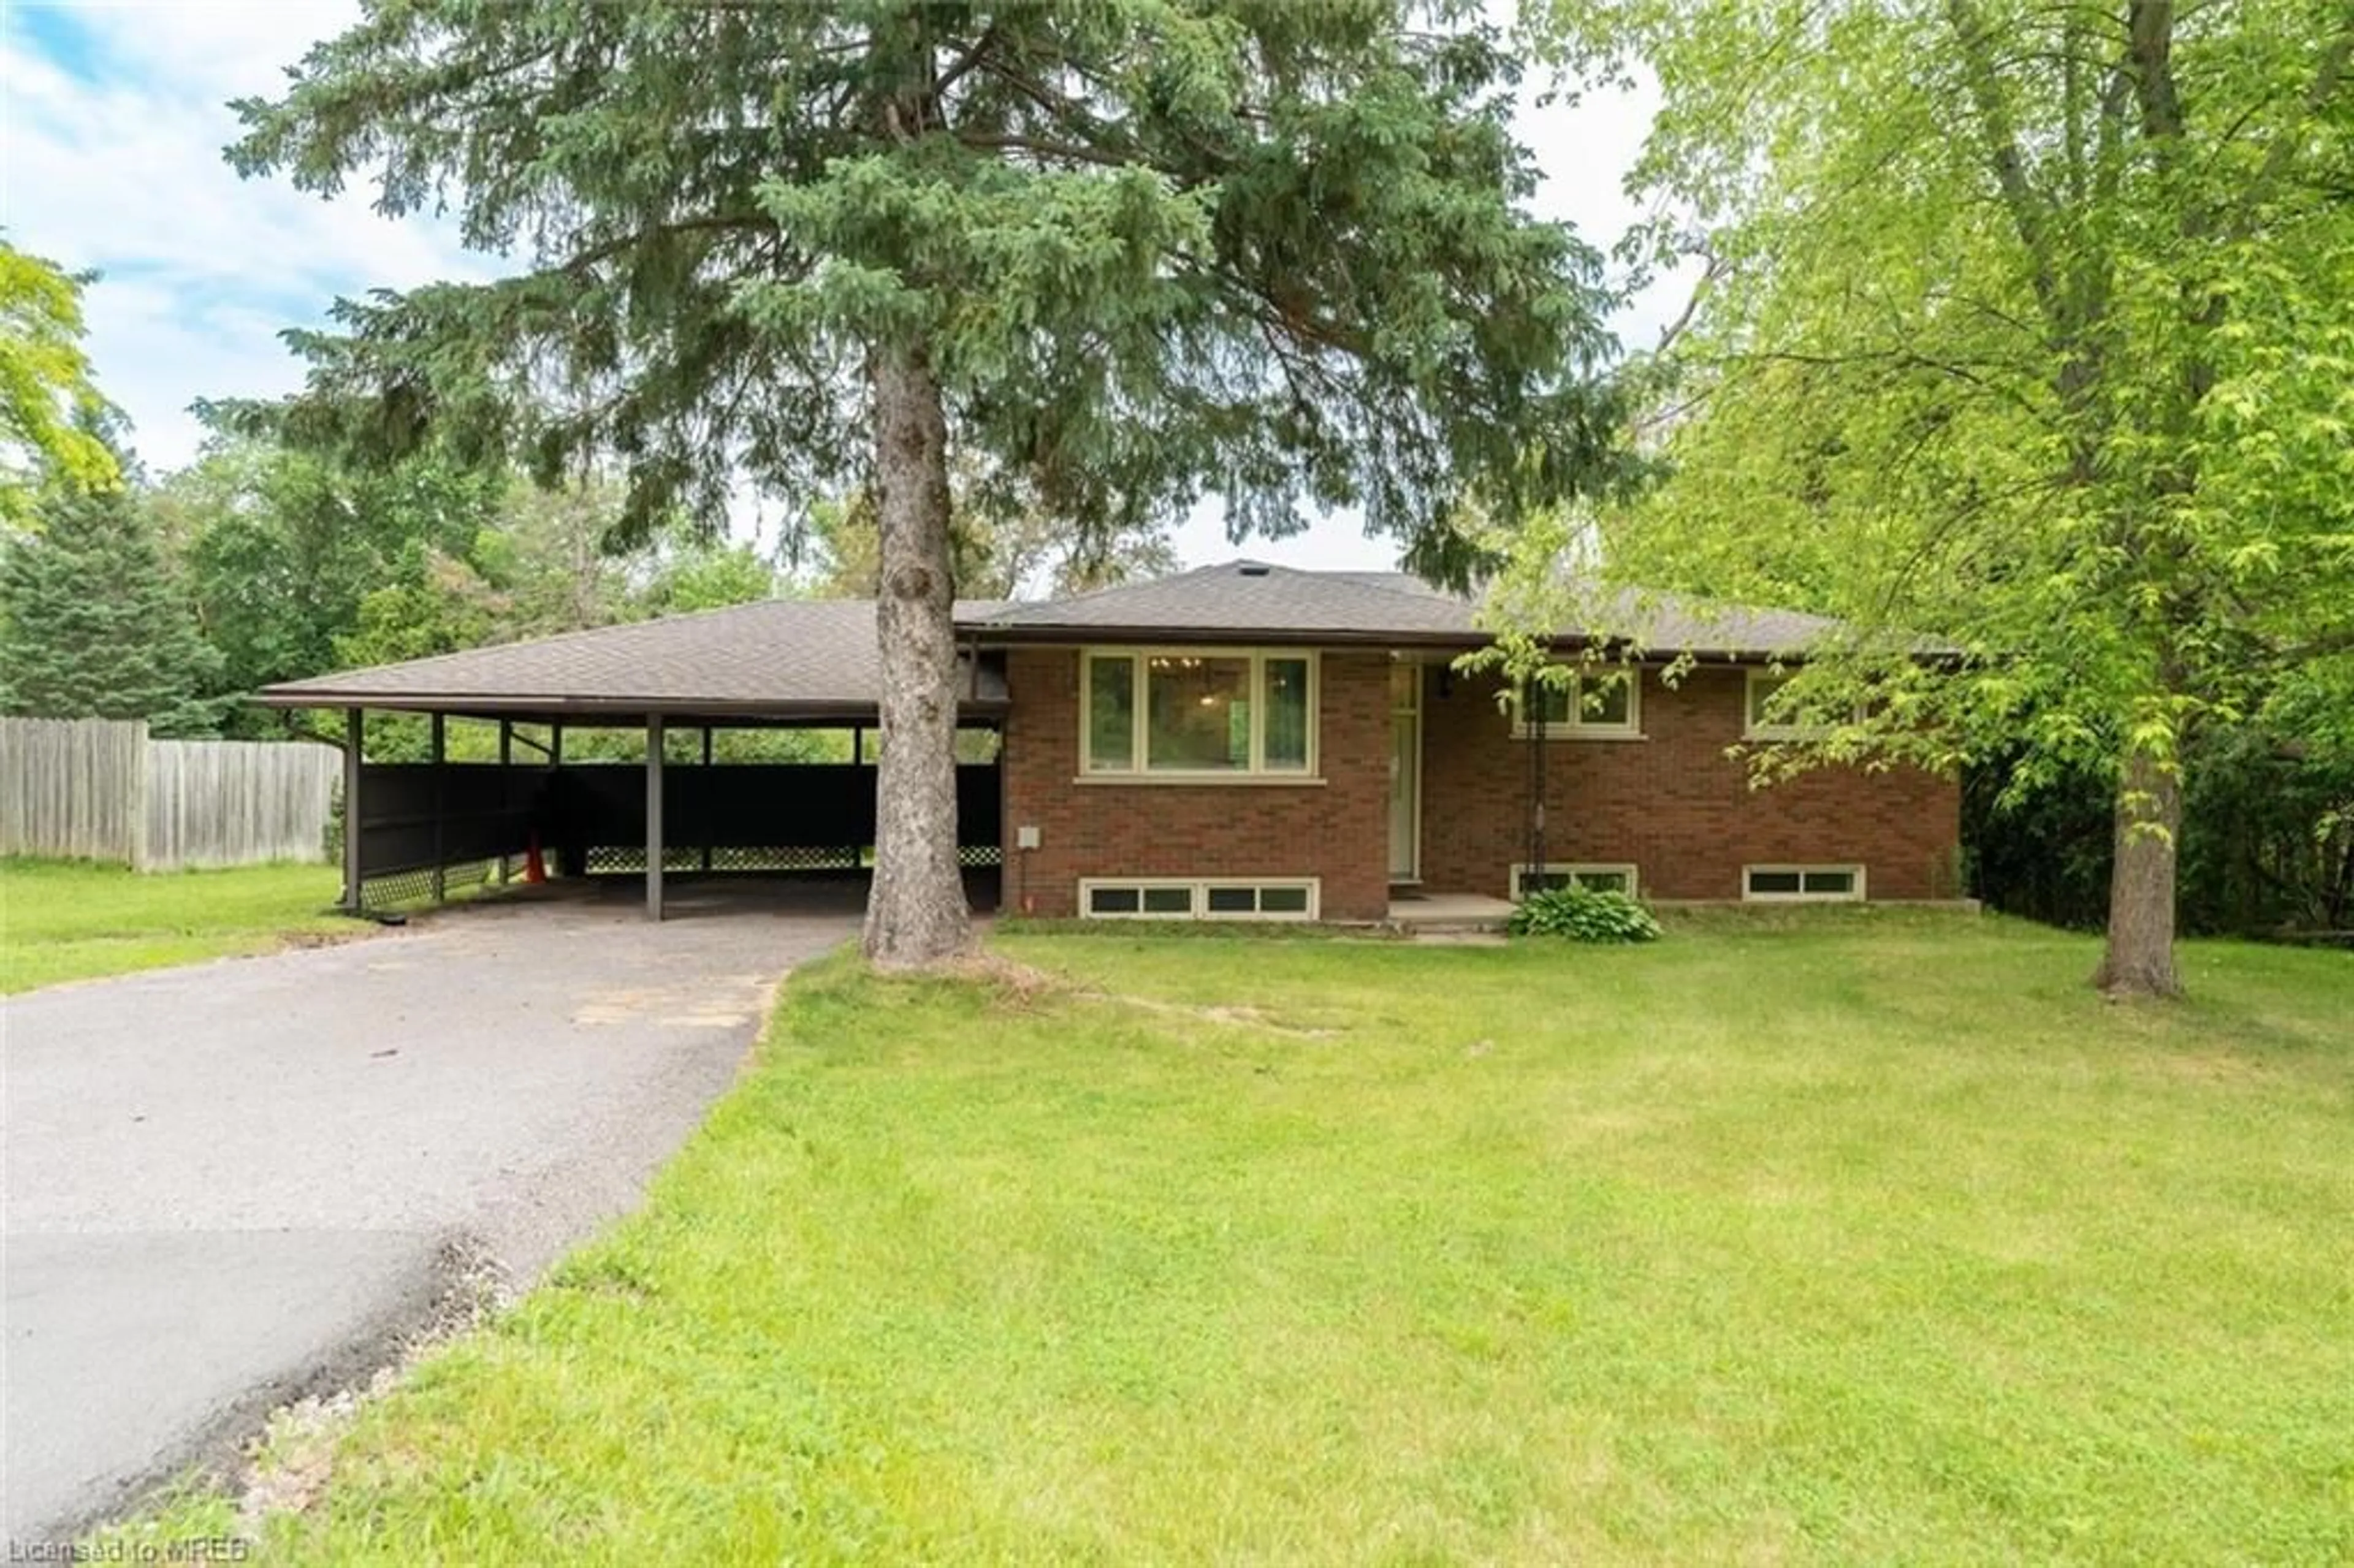 Outside view for 3220 Lakefield Rd, Smith-Ennismore Ontario K9J 6X5